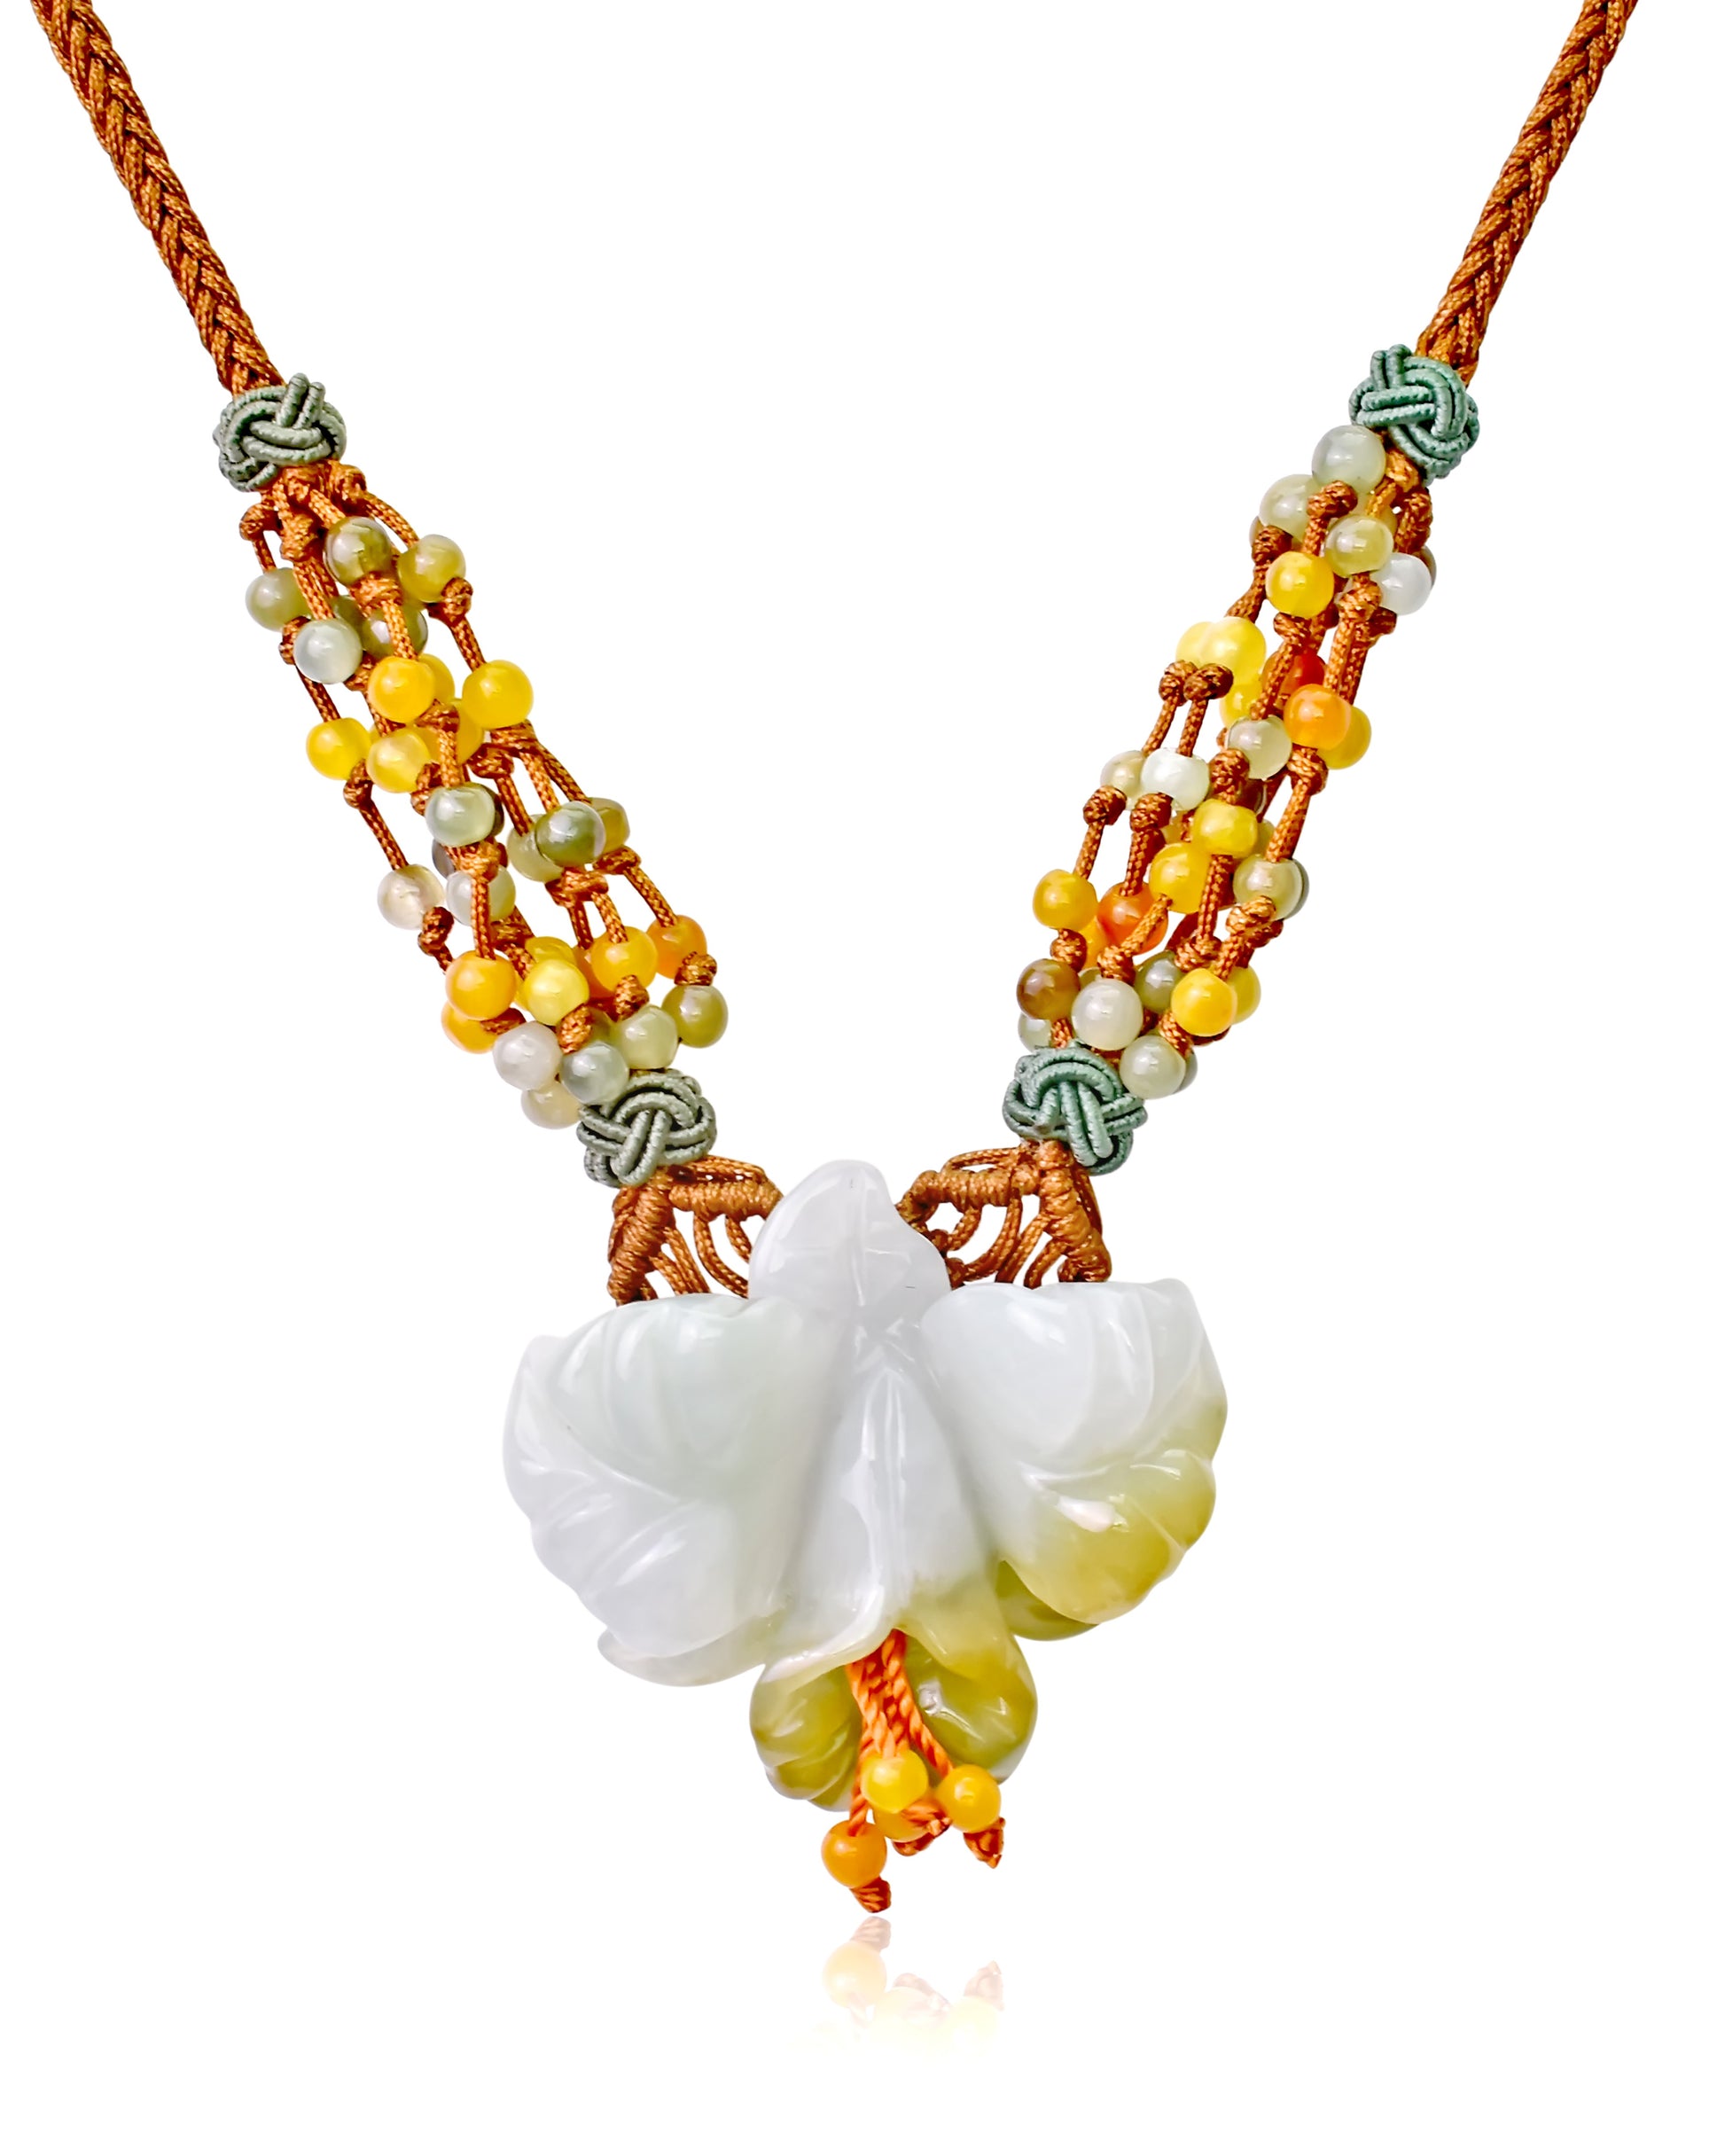 Shine Like Royalty with an Iris Flower Necklace